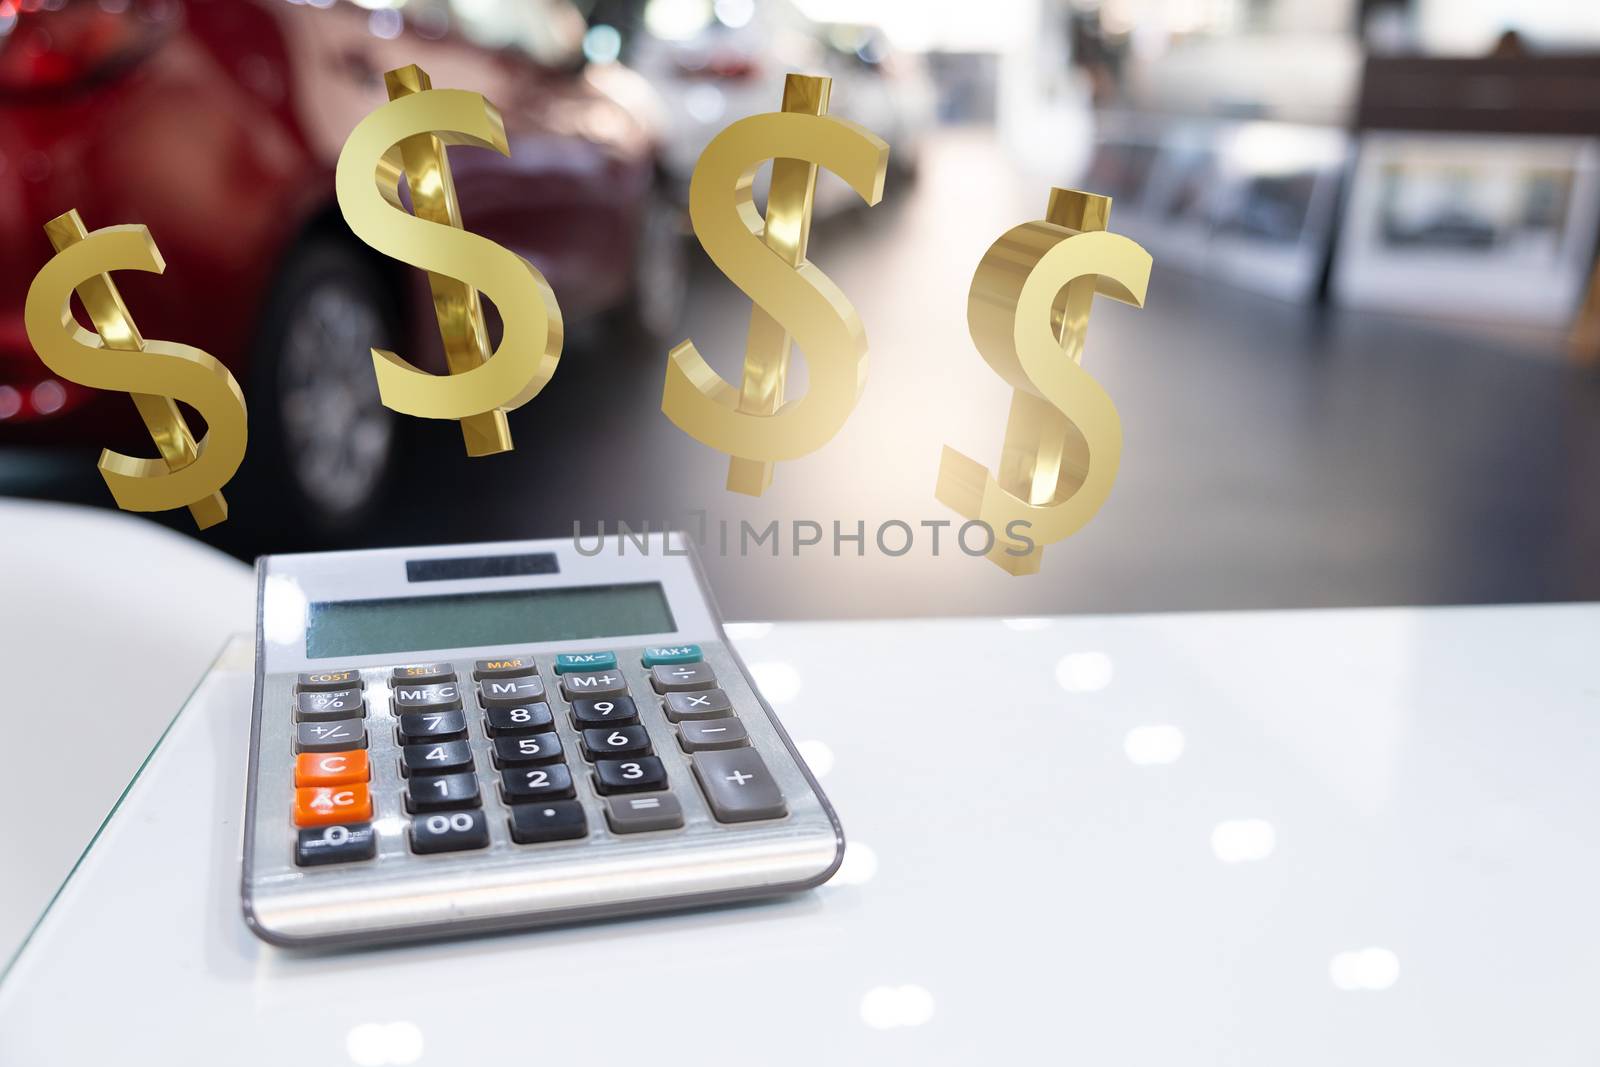 calculator with  dollar 3d render for business finance to car in  showroom blurred background.for automotive automobile or transportation transport